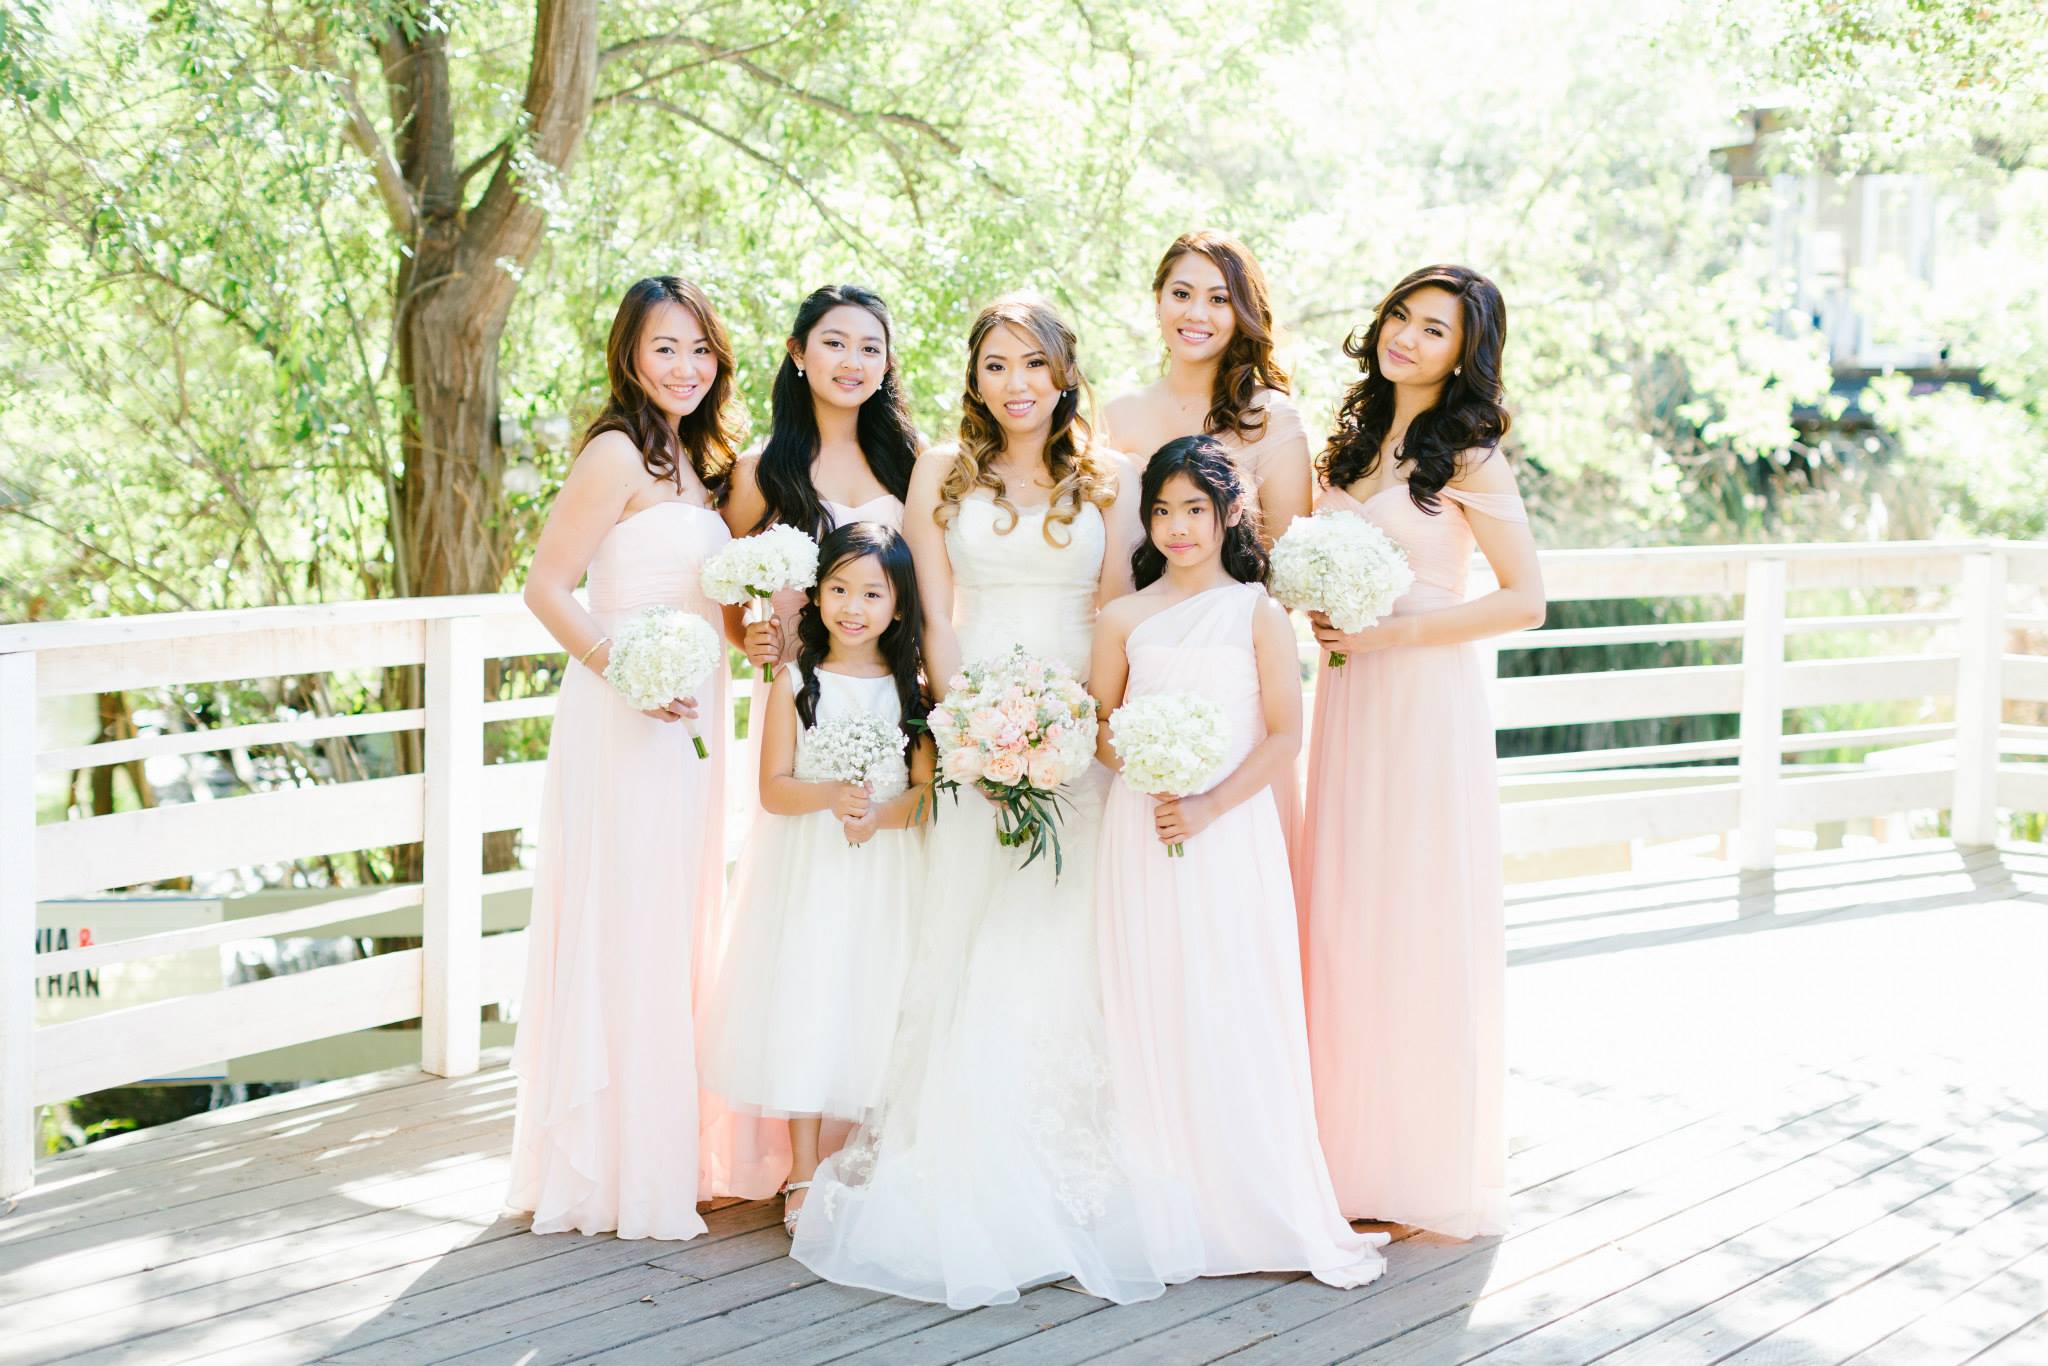 Rustic and elegant wedding at Calamigos Ranch in the Redwood room, bride with bridesmaids, mismatched blush bridesmaid dresses